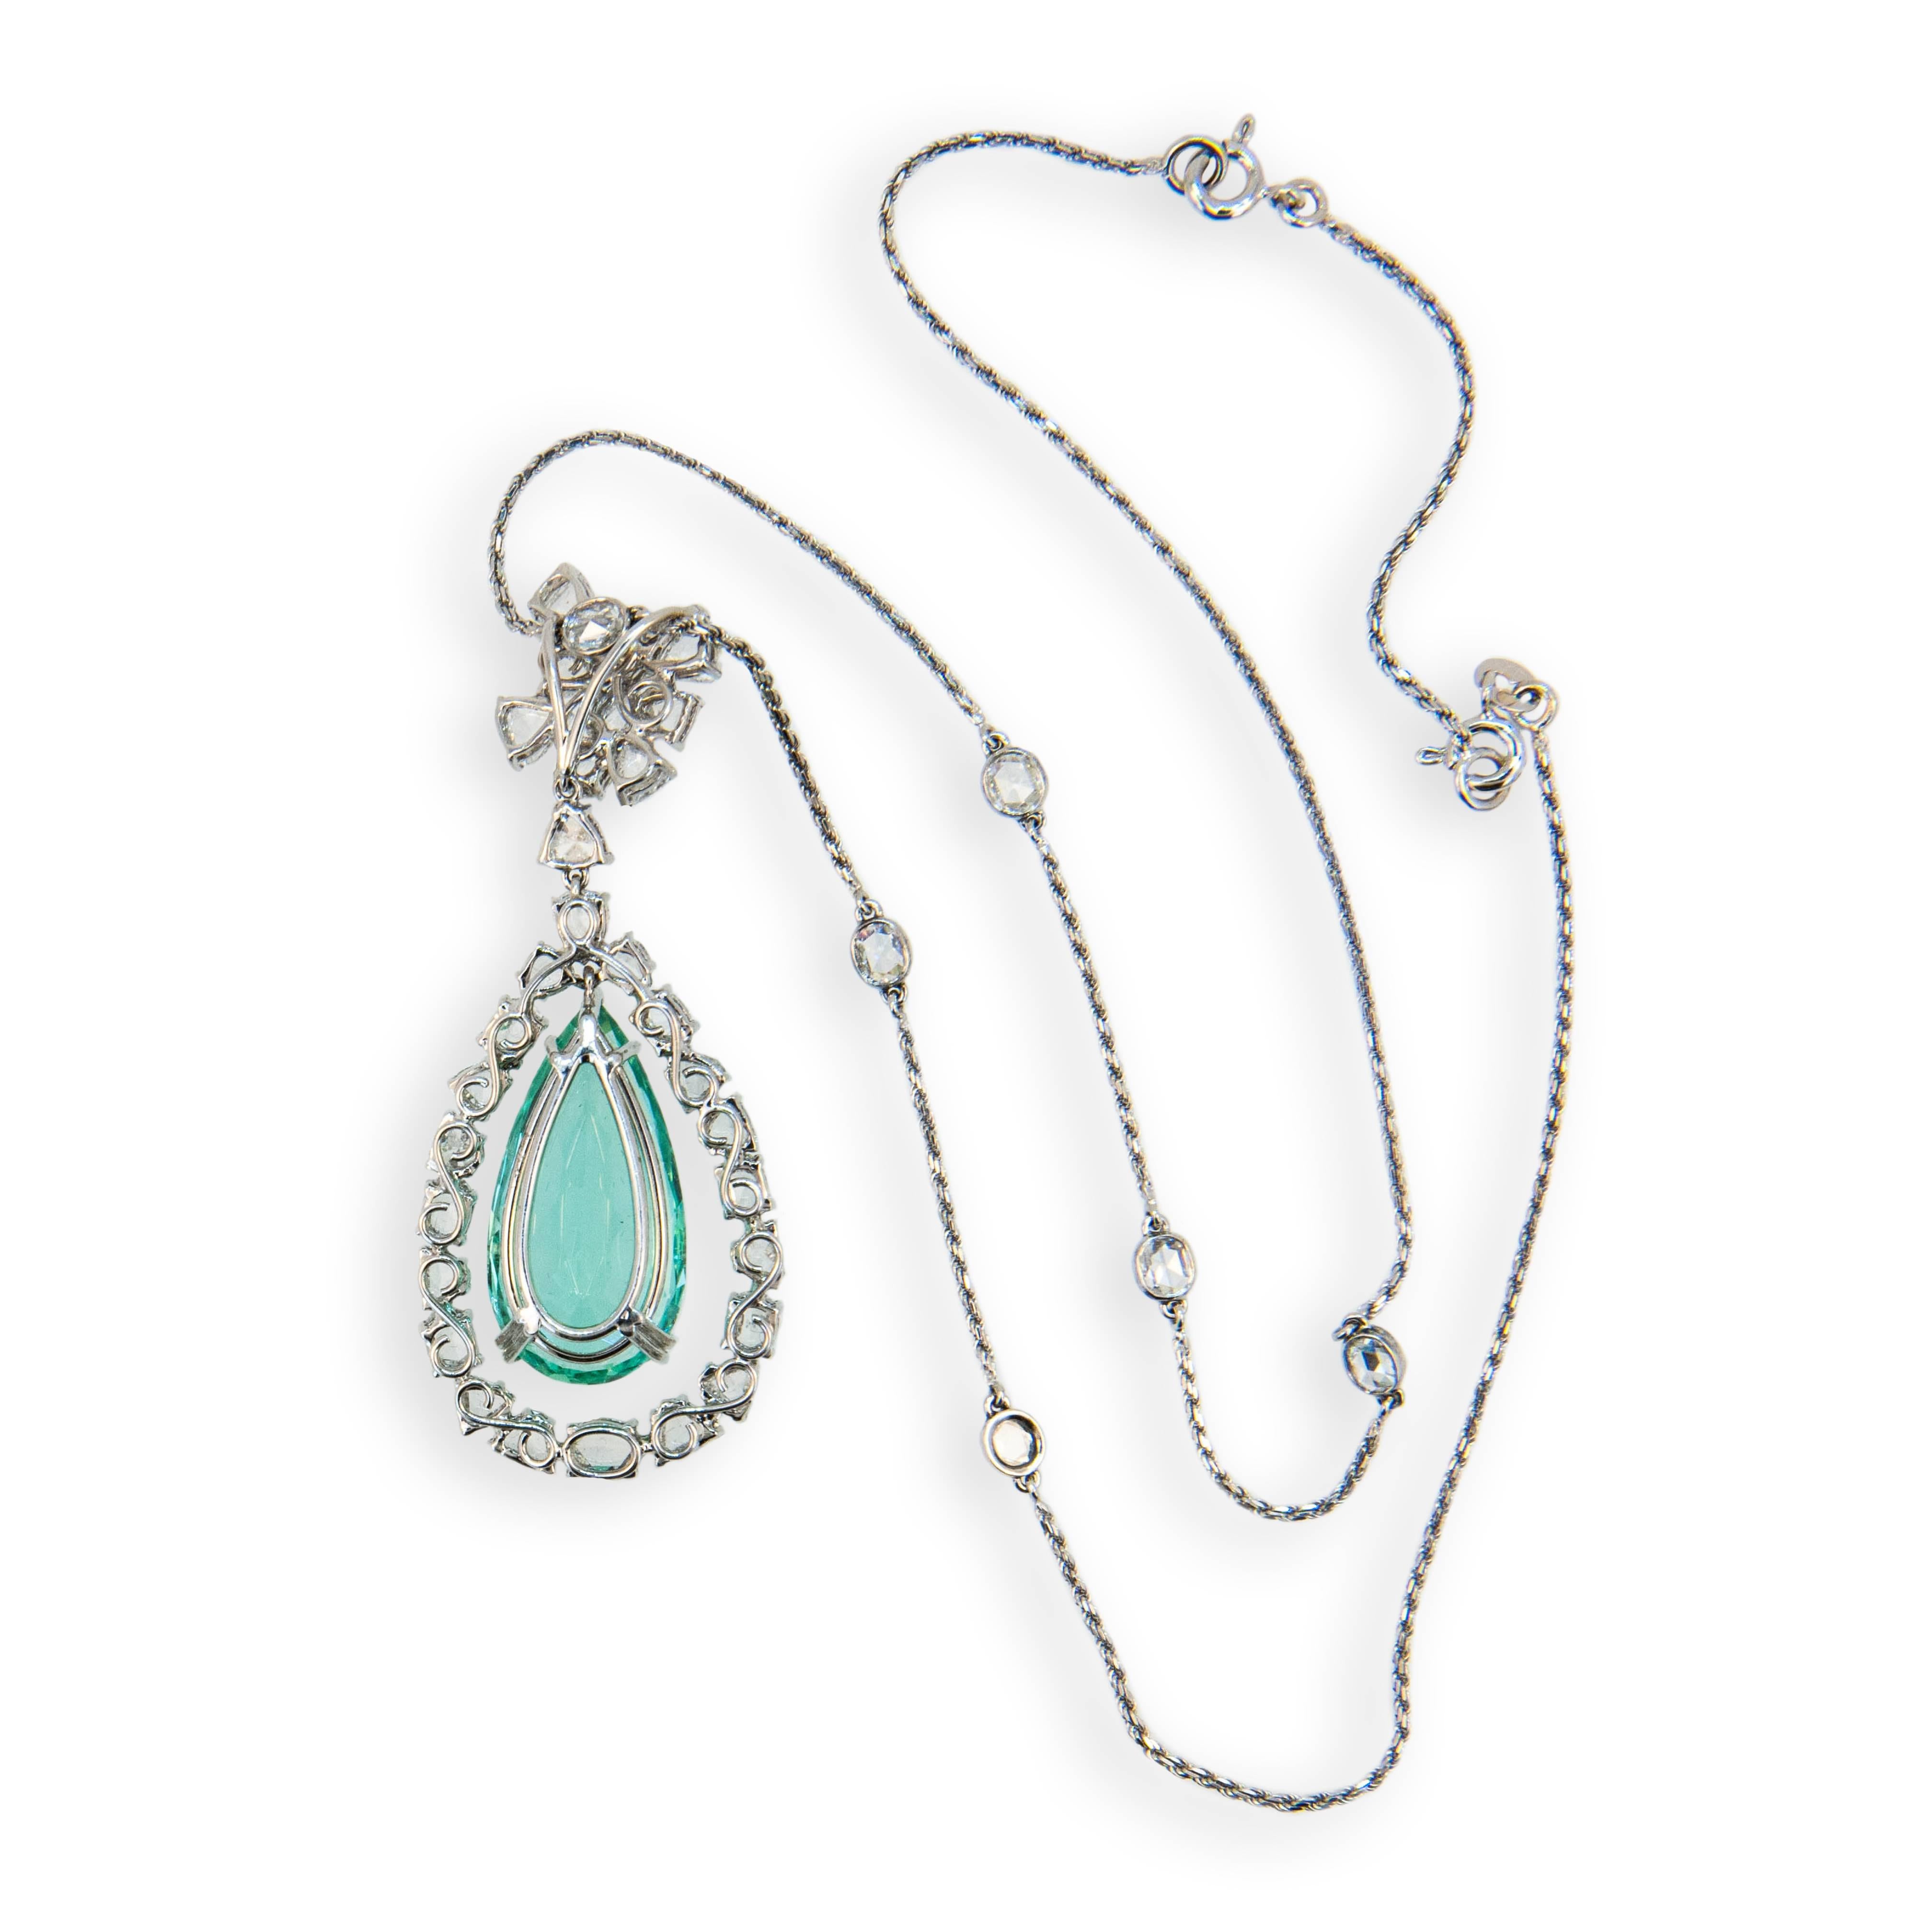 18 karat blackened white gold necklace set with one faceted pear shaped Mint Green Tourmaline 17.94 carats. Set above and around Tourmaline are 30 fancy shaped rose cut diamonds and six oval rose cut diamonds bezel set on chain. Total weight of 36